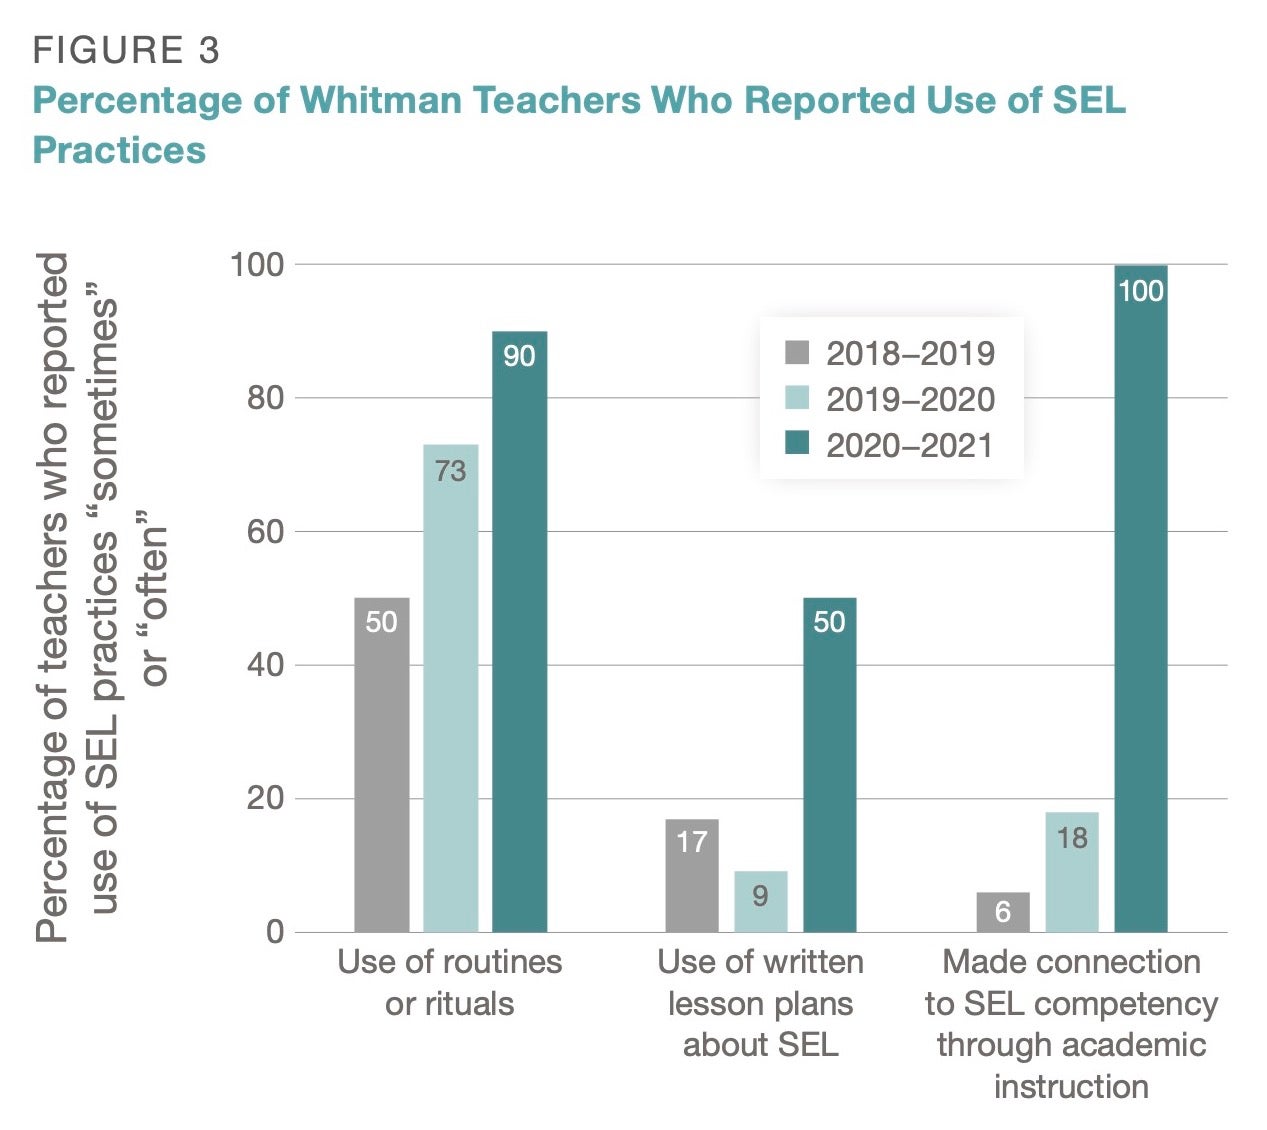 Percentage of Whitman Teachers Who Reported Use of SEL Practices